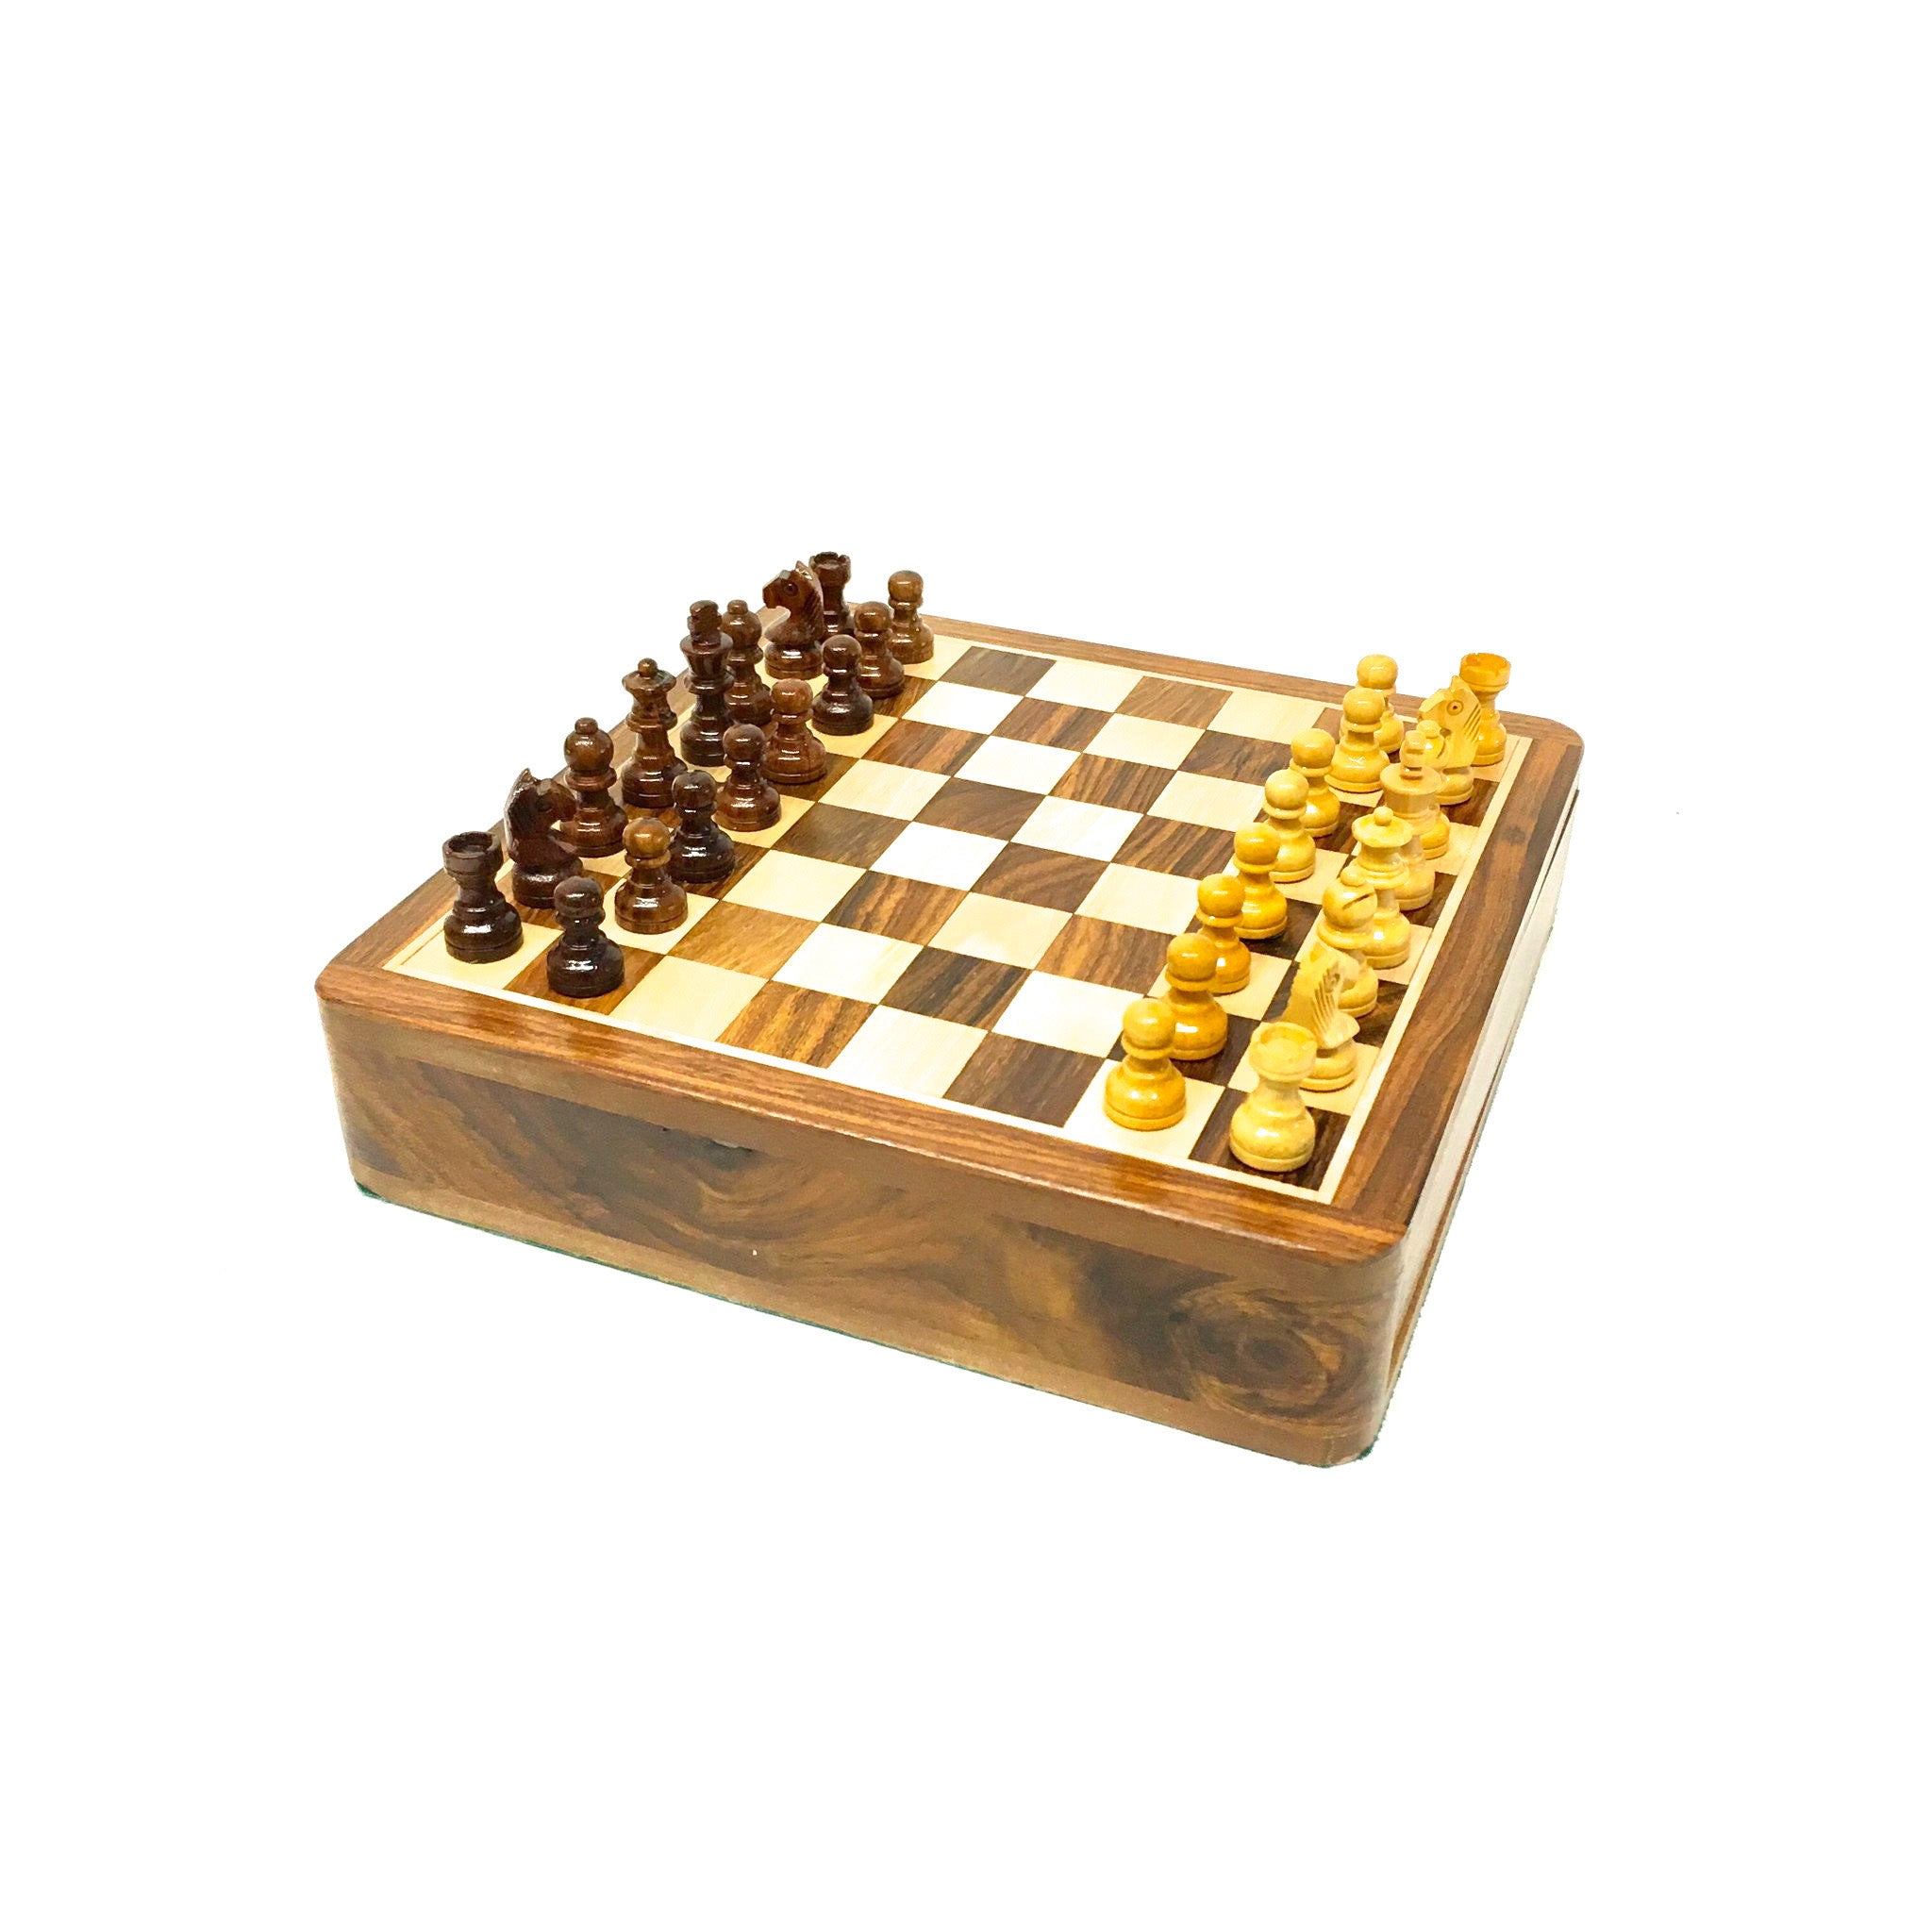 7.5" Square Magnetic Chess Board | Q Boutique – World Chess Hall of Fame